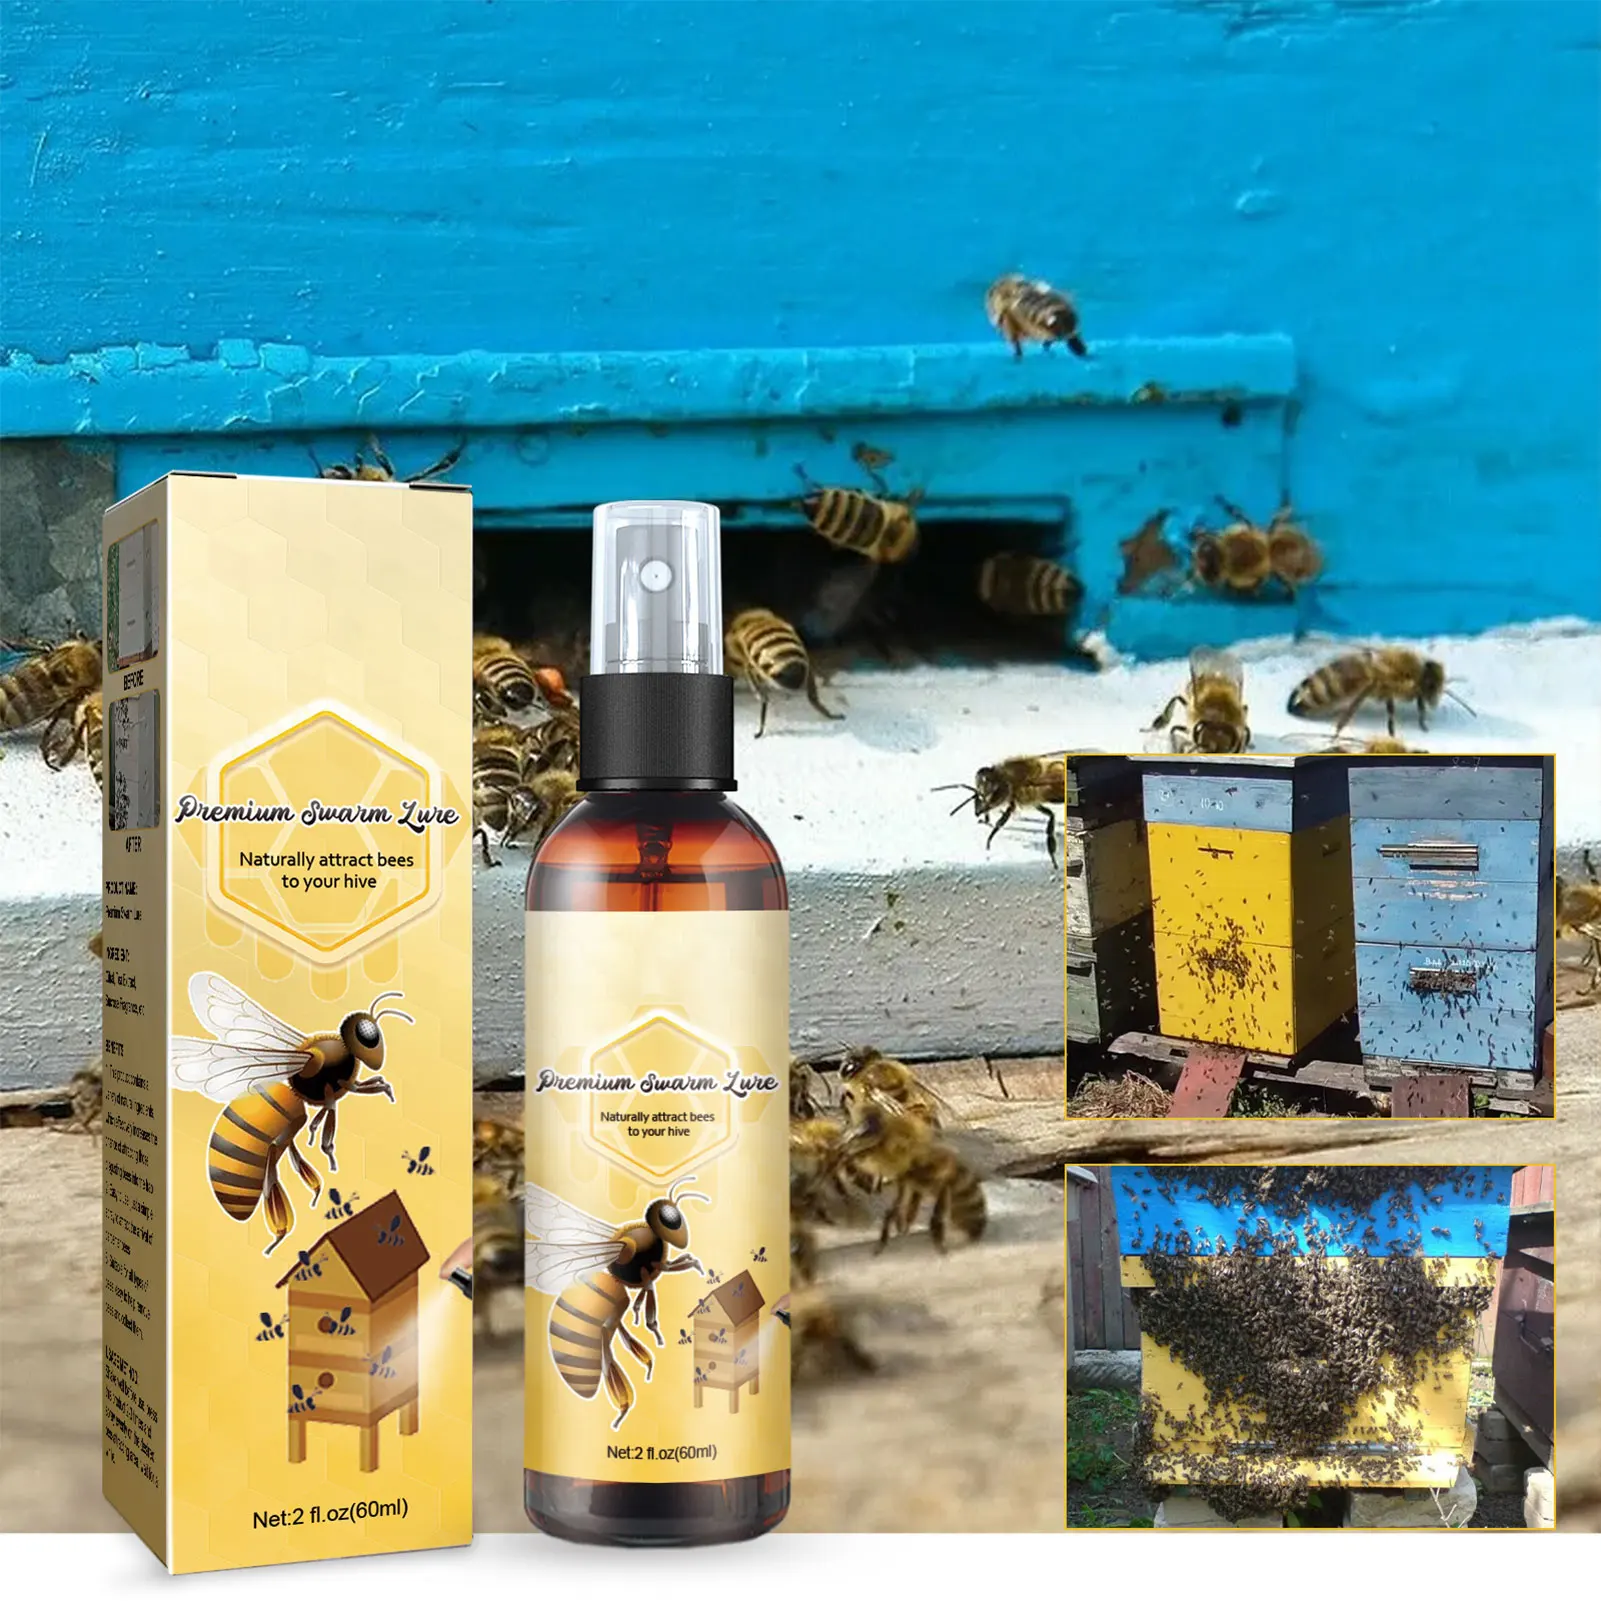 1 box 60ml Bee Attractant Spray Attracting Bees to Hive Garden Spray Beekeeping Tools for Garden